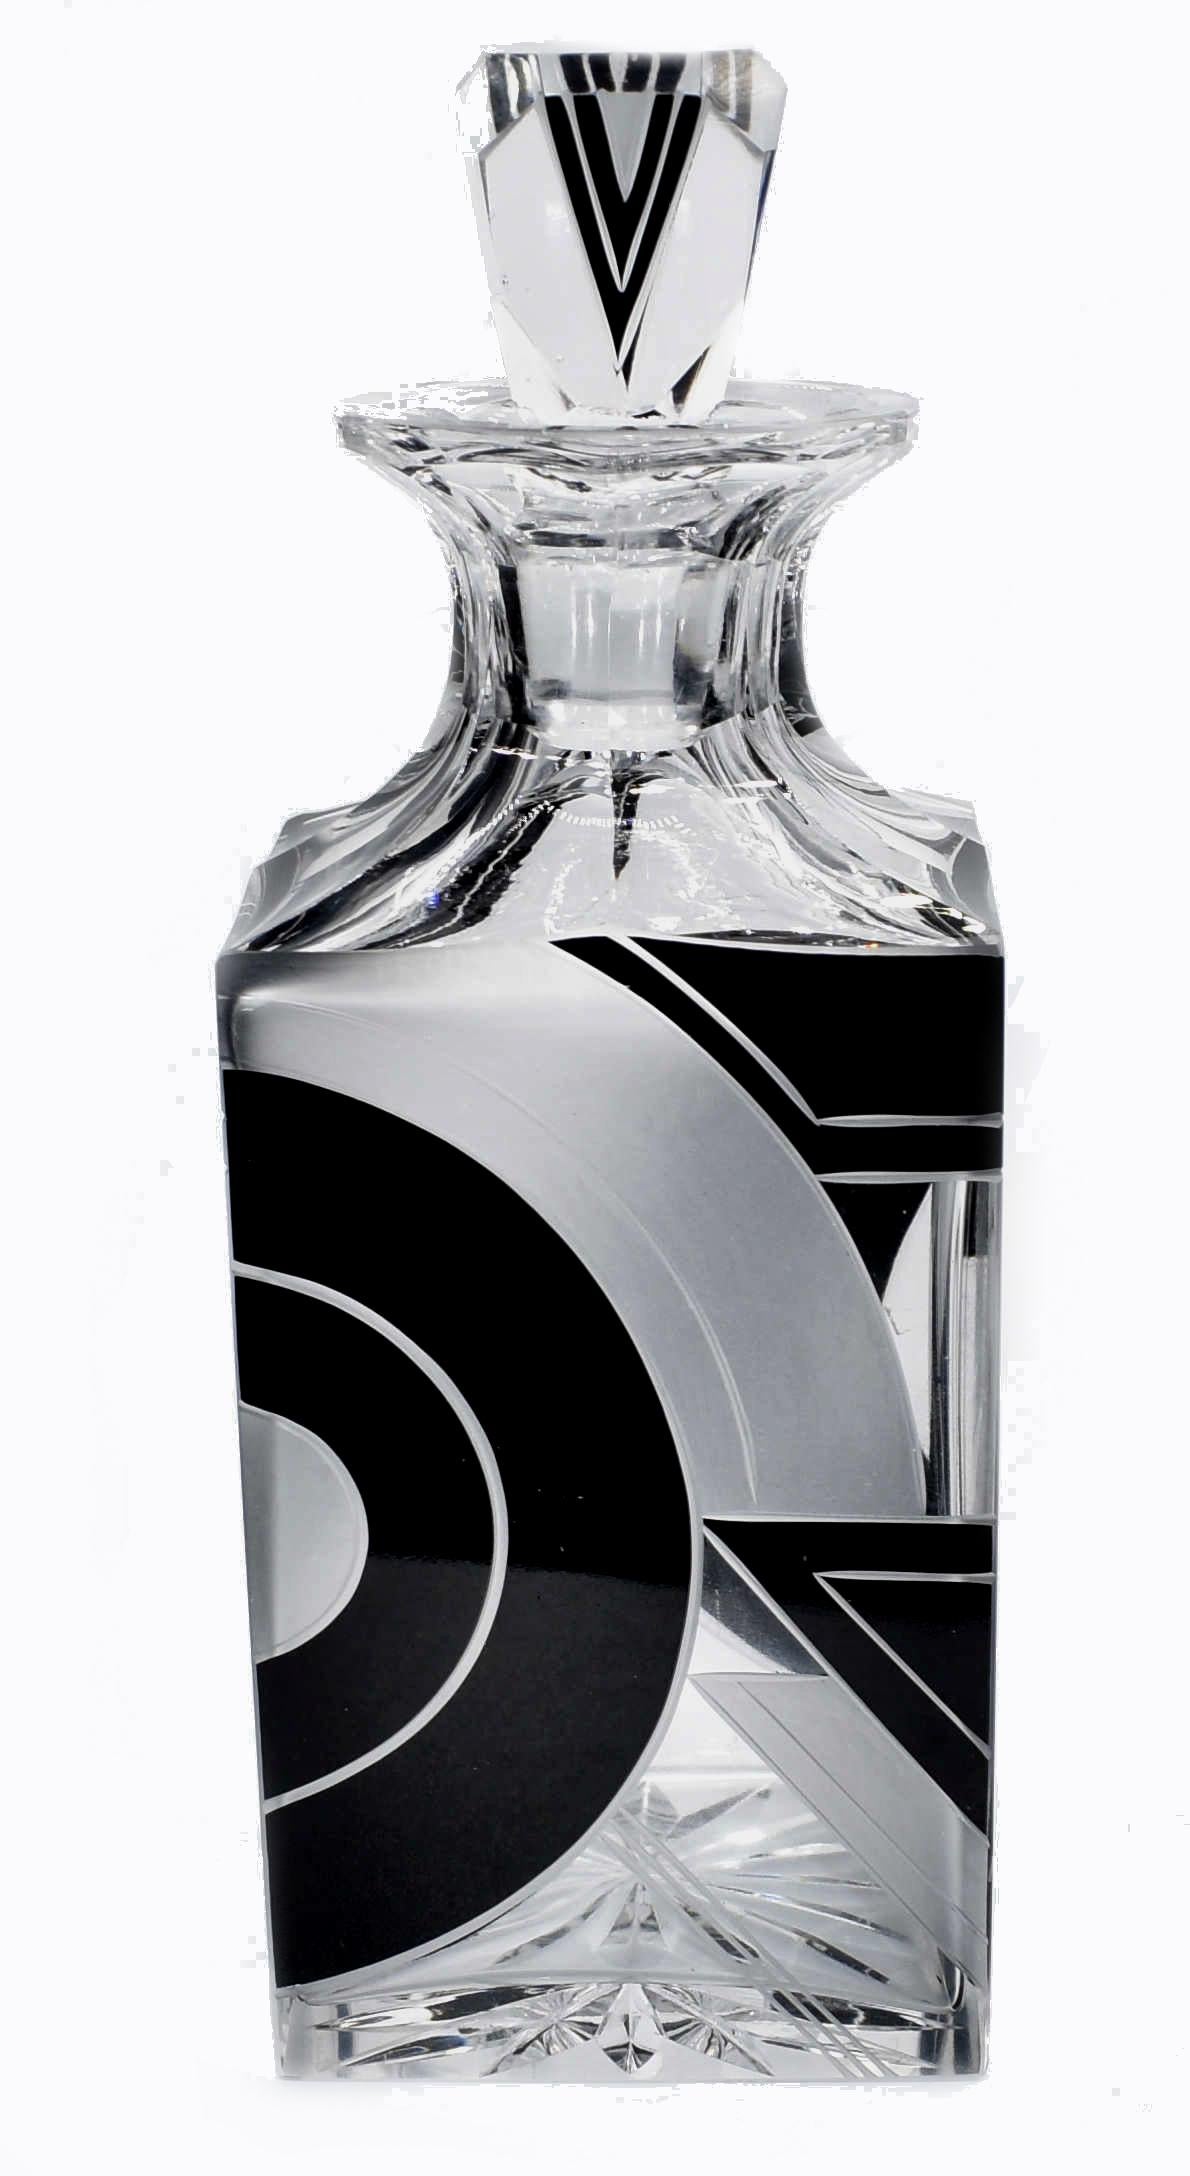 Wonderful high quality, very striking looking Art Deco Czech glass decanter set. Features a good sized decanter with stopped and six decent sized glass tumblers. The whole set is enamelled in jet black with etching to highlight the detailing and